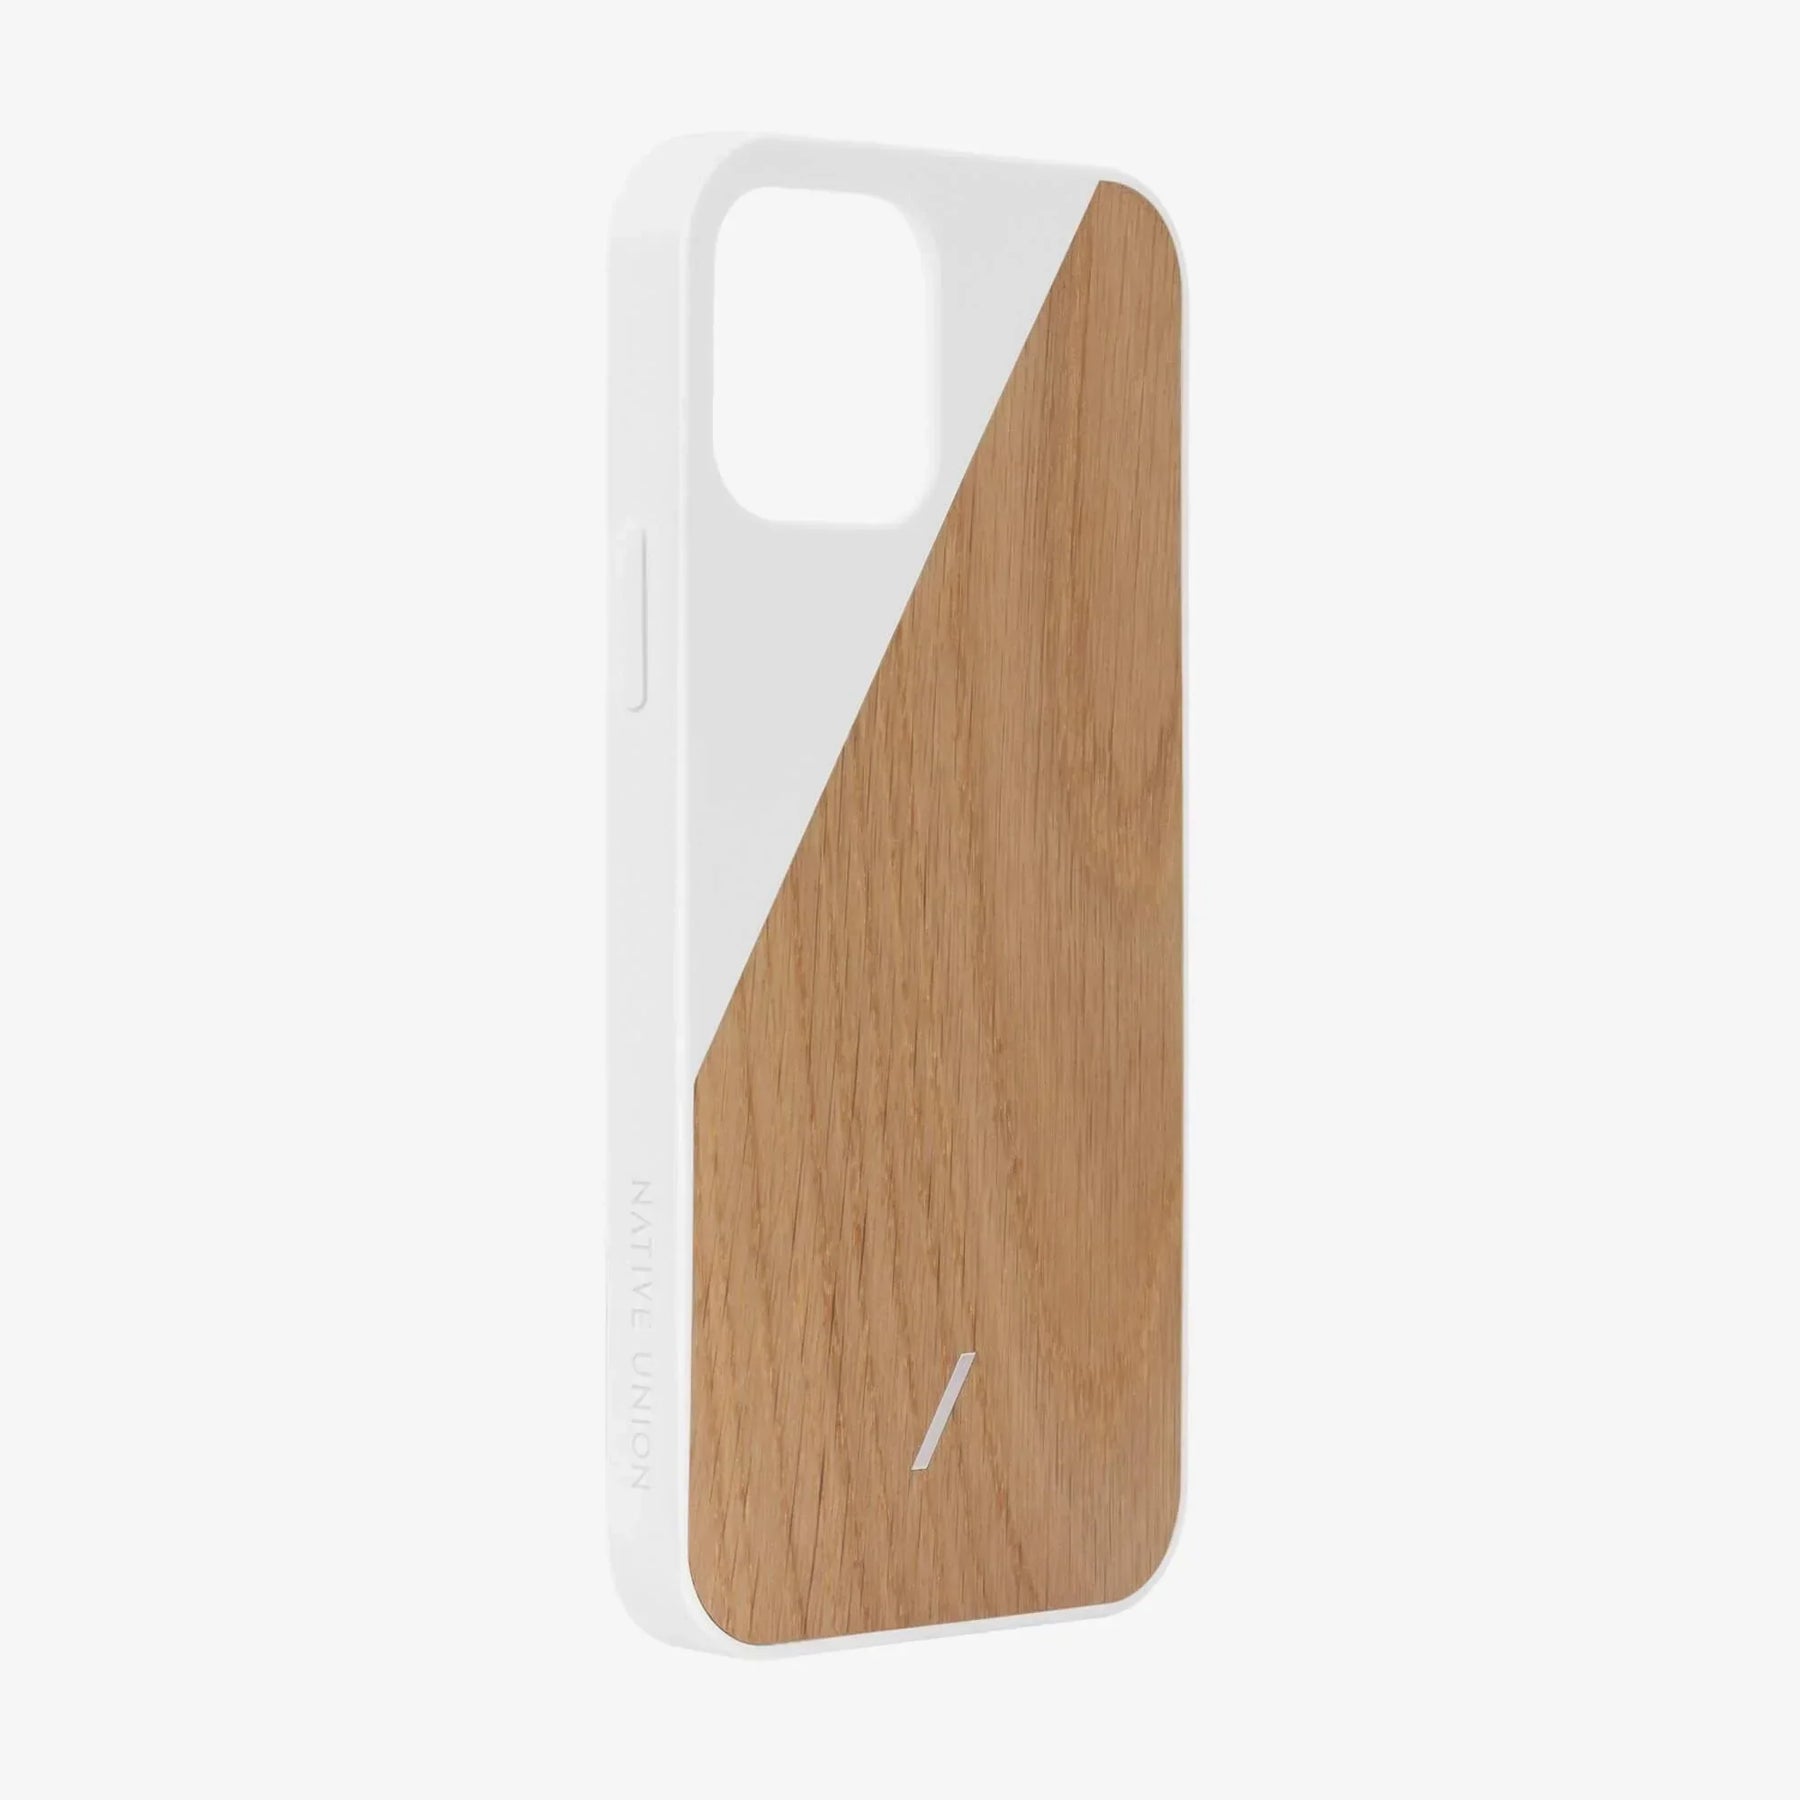 Clic Wooden (iPhone 12)